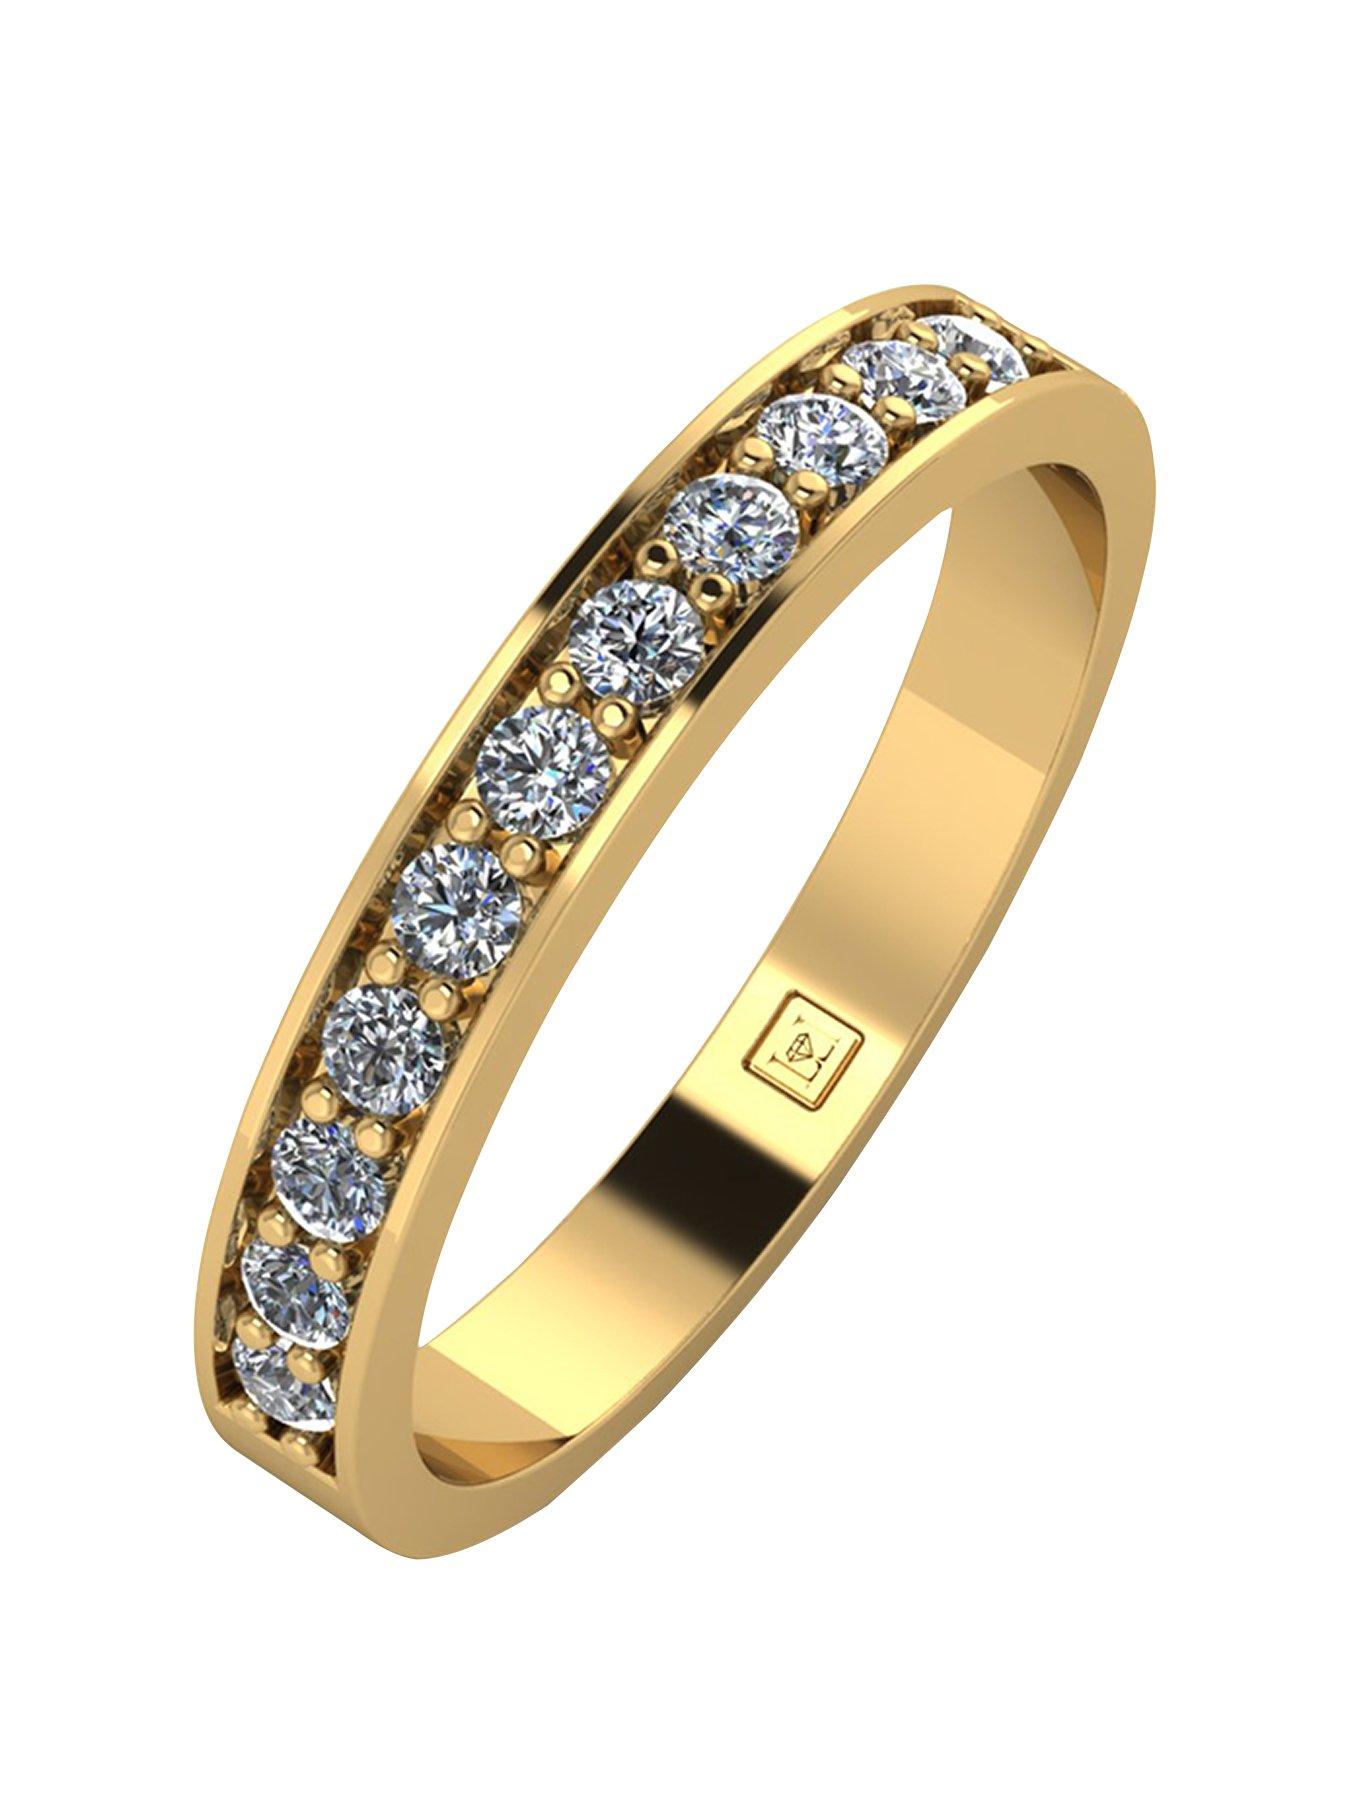 Jewellery & watches Lady Lynsey 9ct Gold 1ct Moissanite Eternity Ring